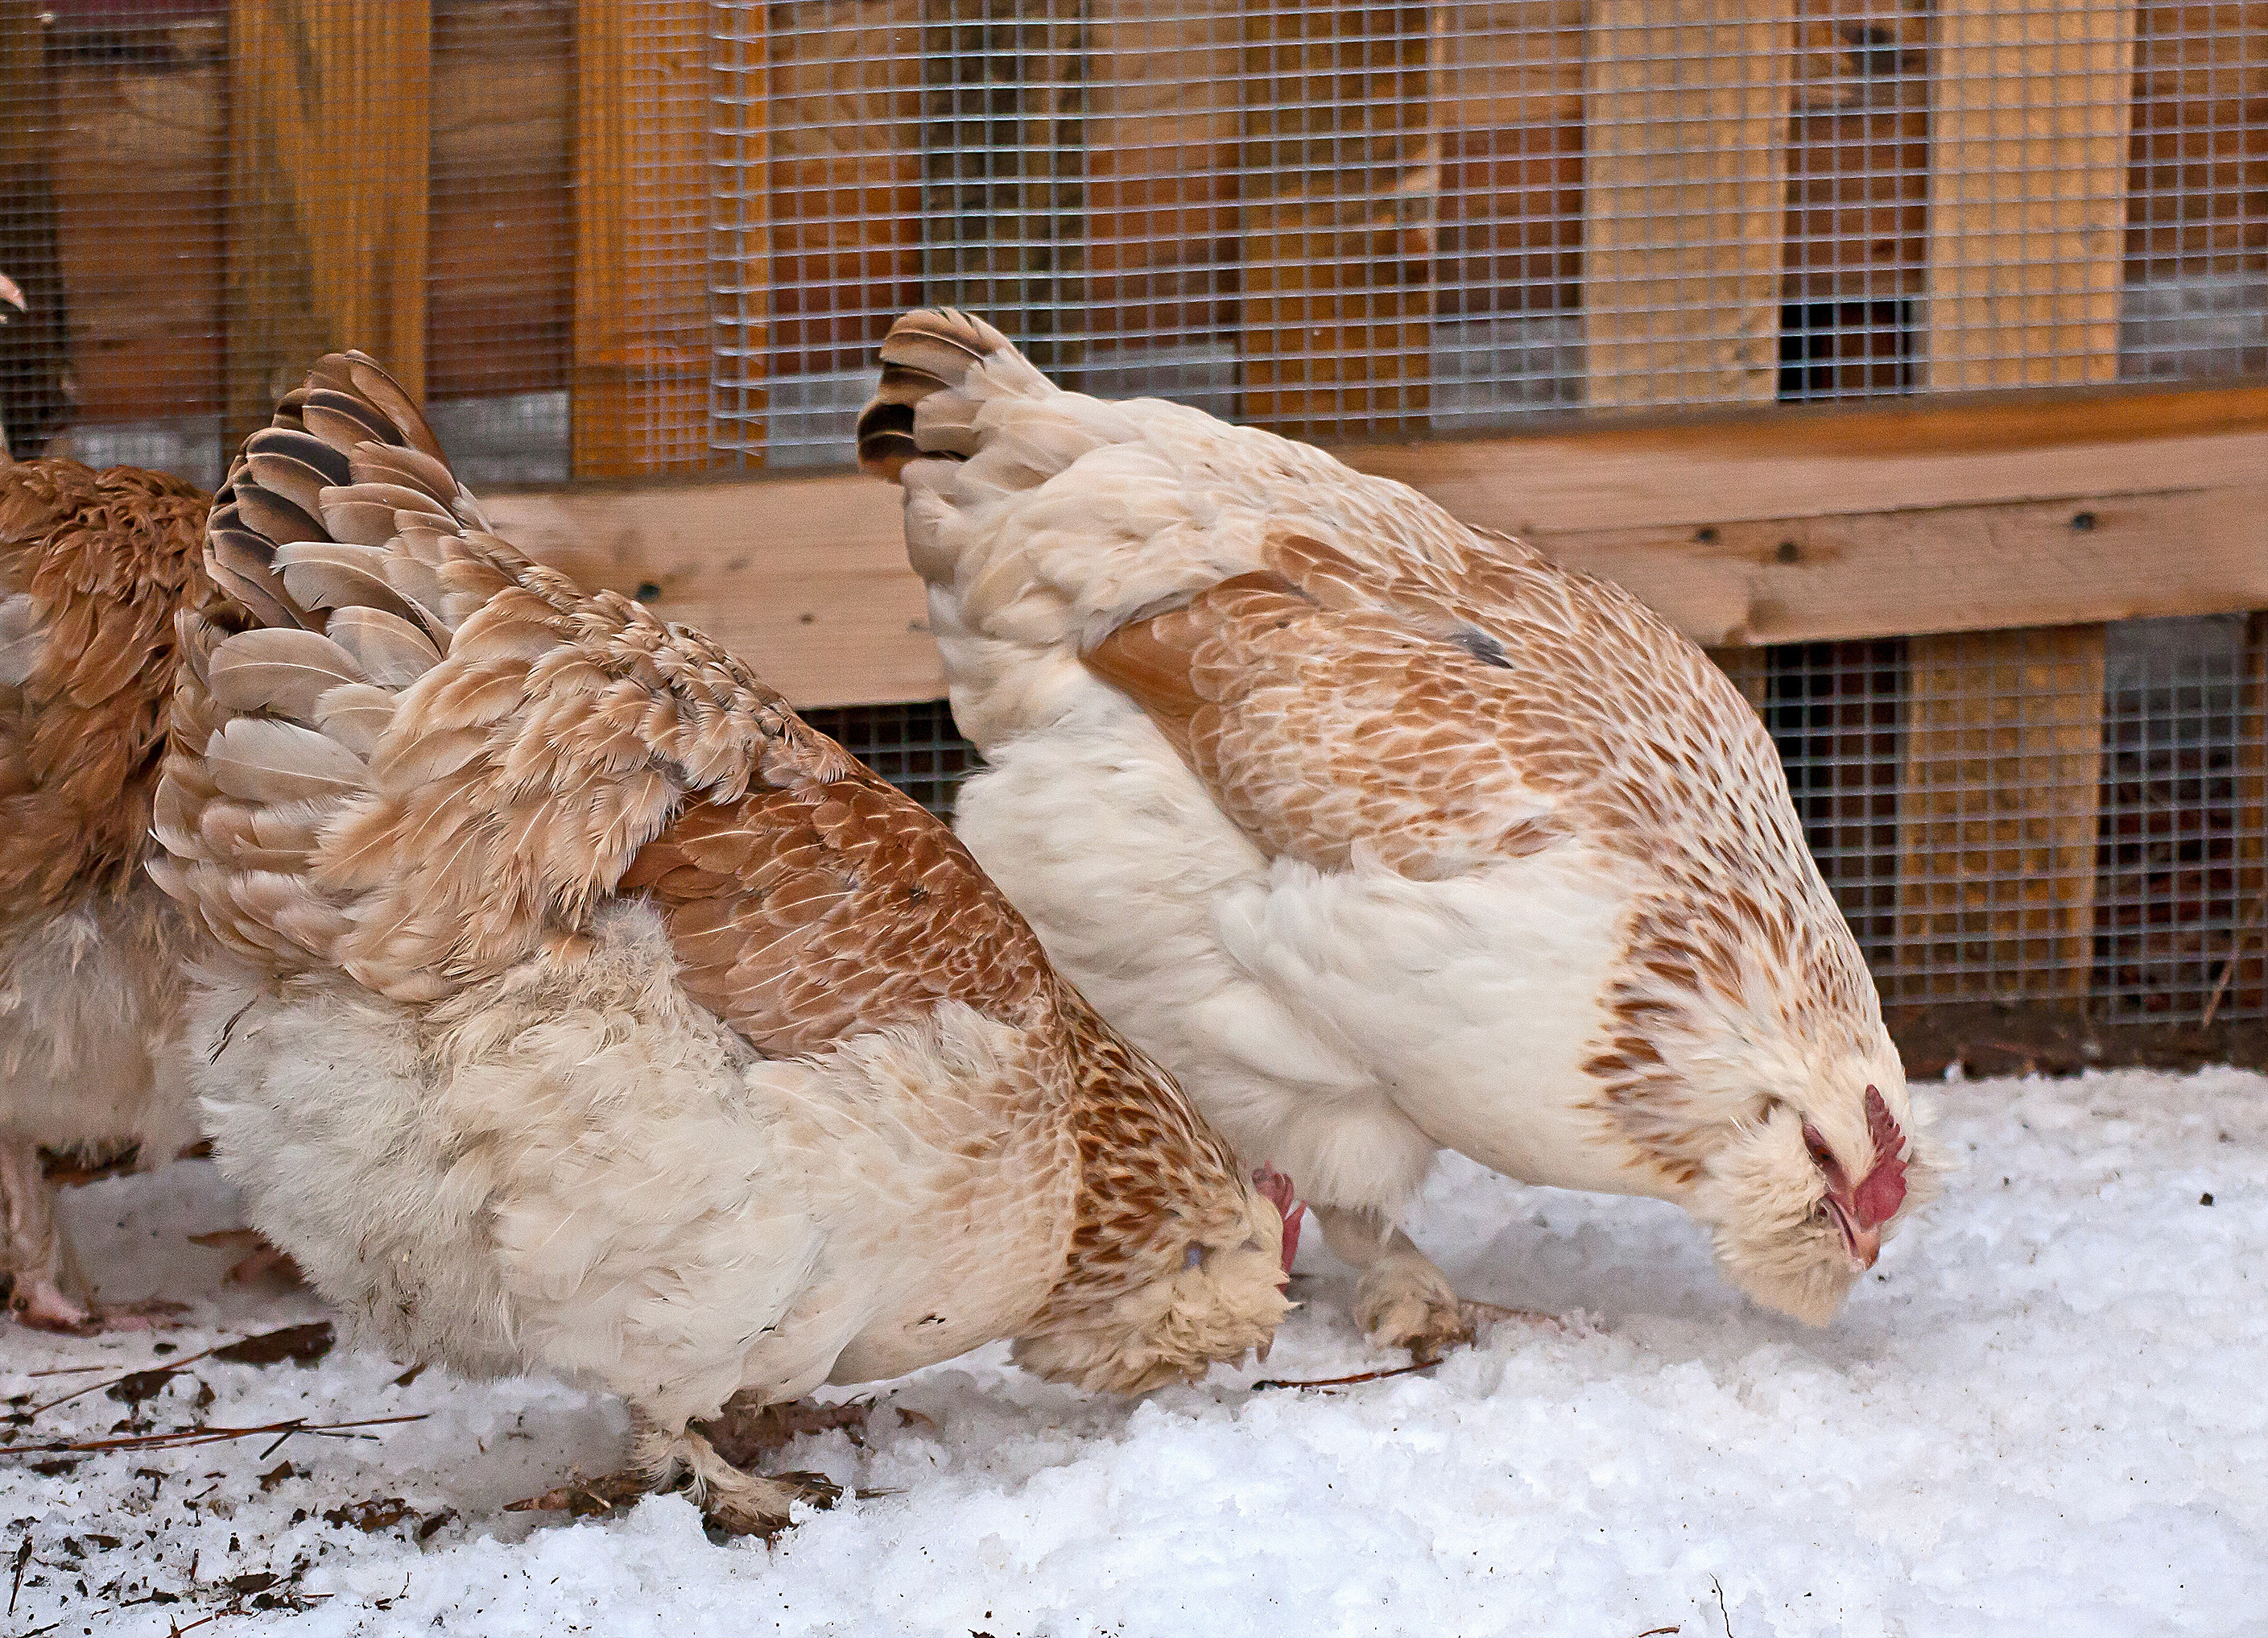 Two chickens eating seeds in the snow